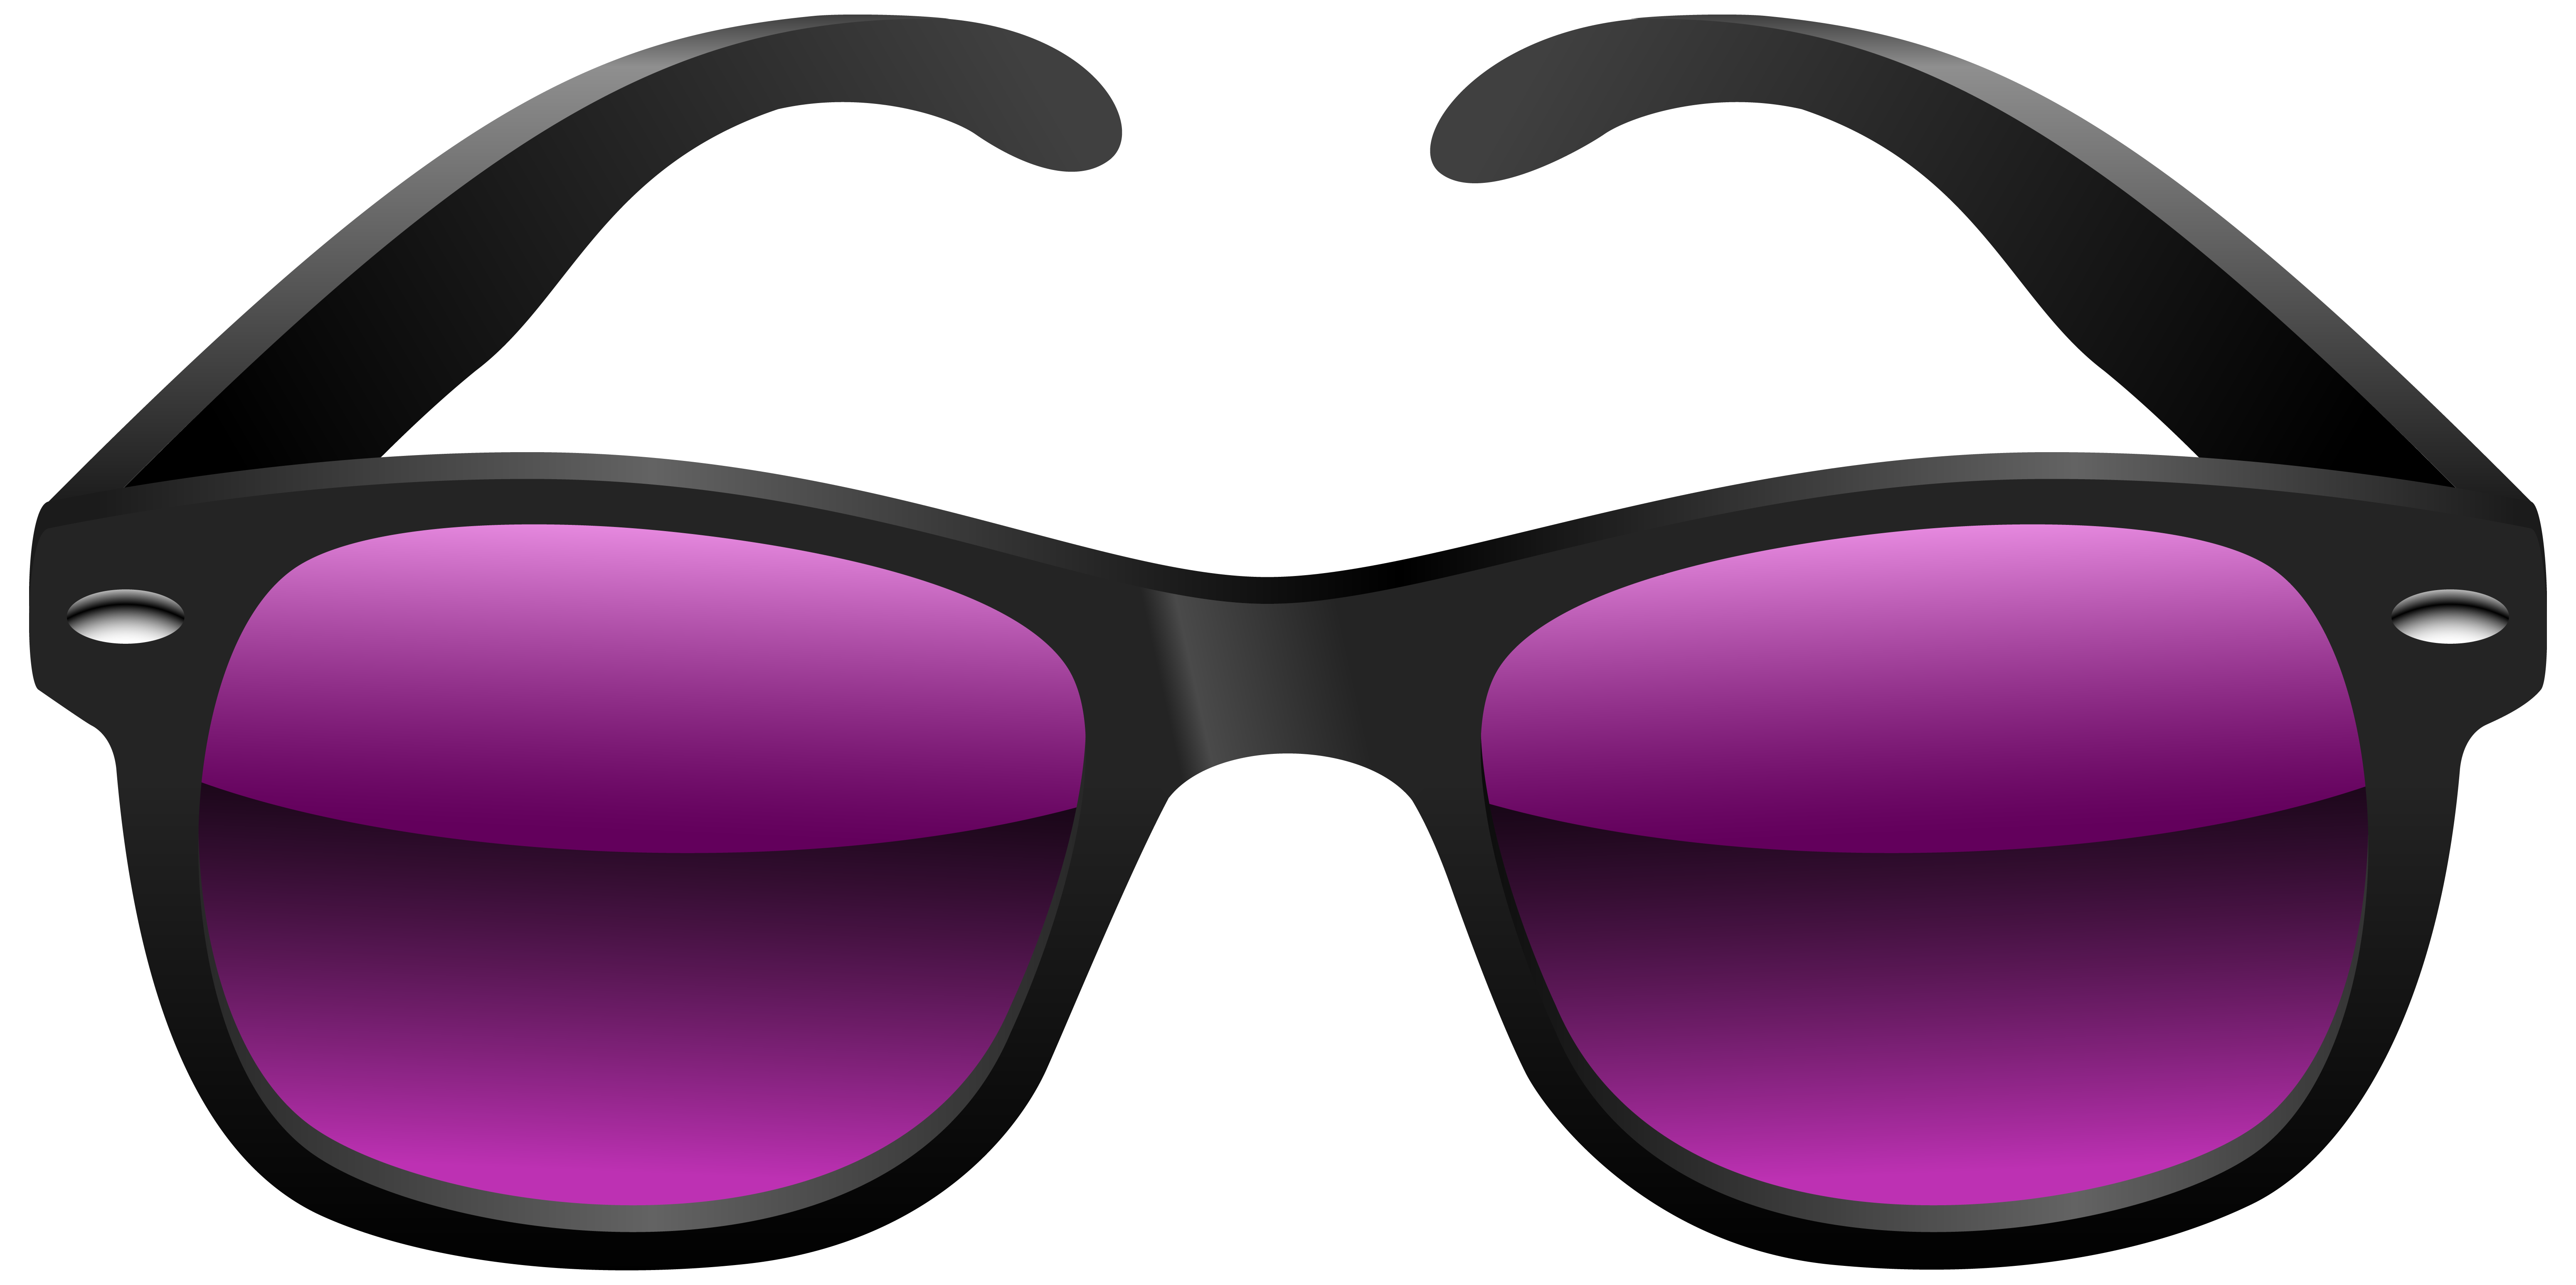 Black And Purple Sunglasses Image Free Download Png Clipart